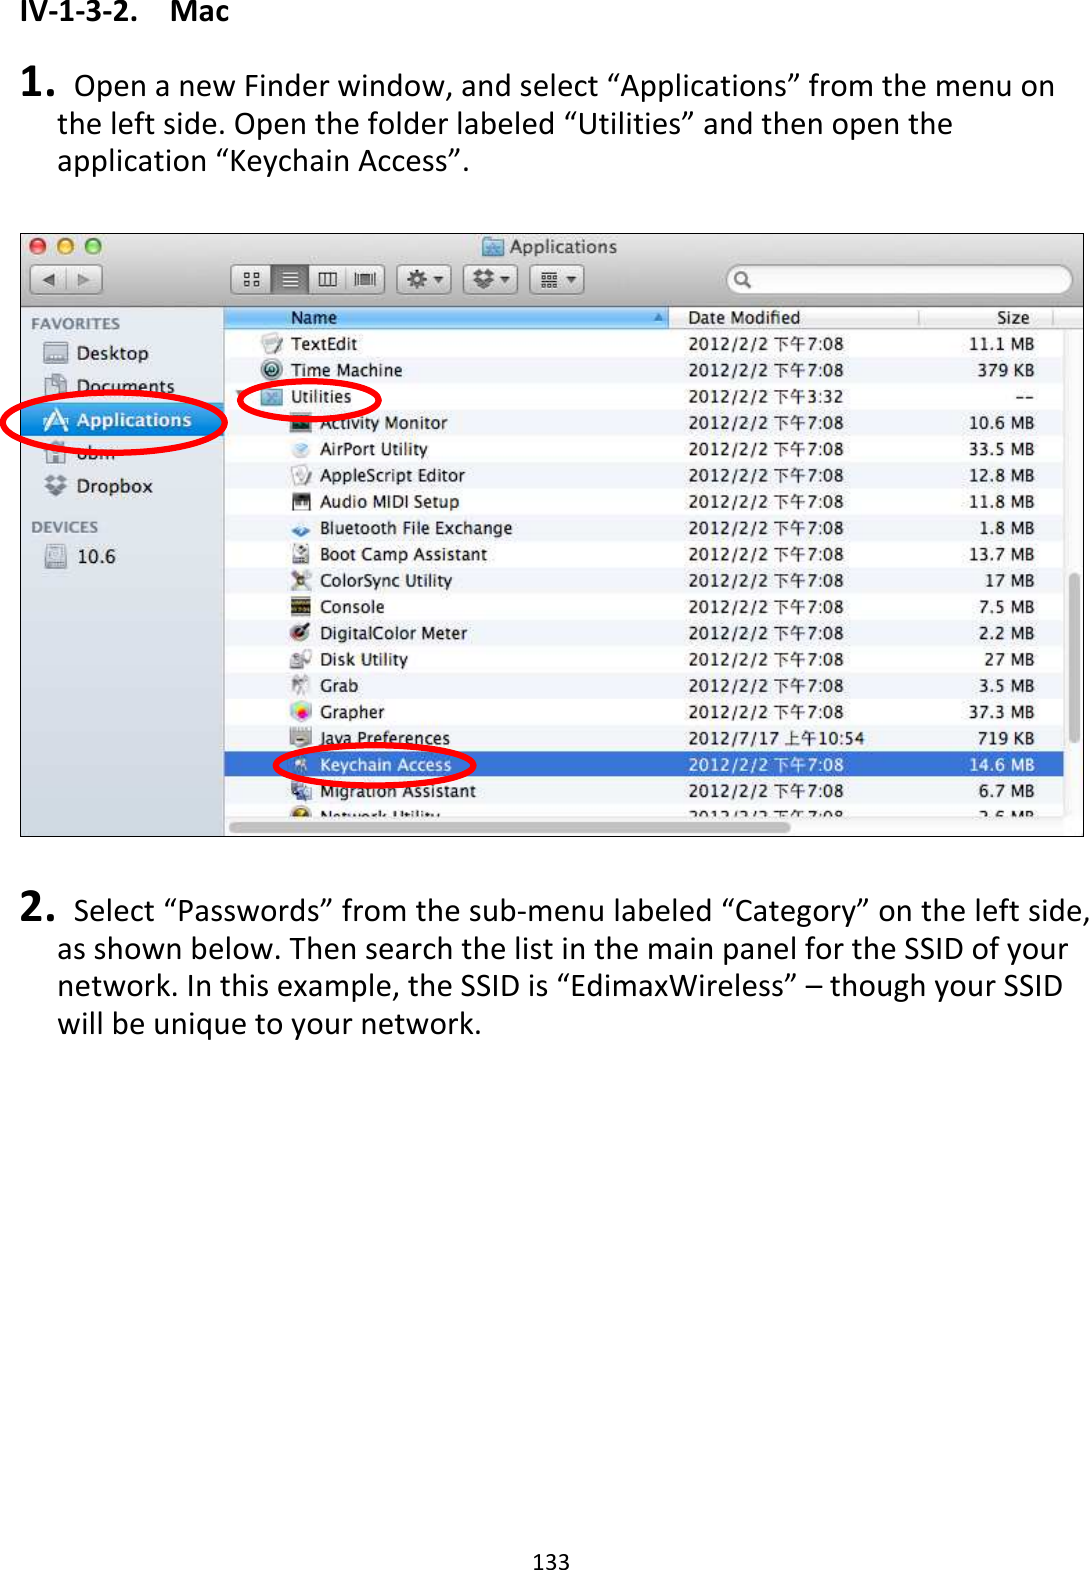 133 IV-1-3-2.  Mac  1.   Open a new Finder window, and select “Applications” from the menu on the left side. Open the folder labeled “Utilities” and then open the application “Keychain Access”.    2.   Select “Passwords” from the sub-menu labeled “Category” on the left side, as shown below. Then search the list in the main panel for the SSID of your network. In this example, the SSID is “EdimaxWireless” – though your SSID will be unique to your network.  